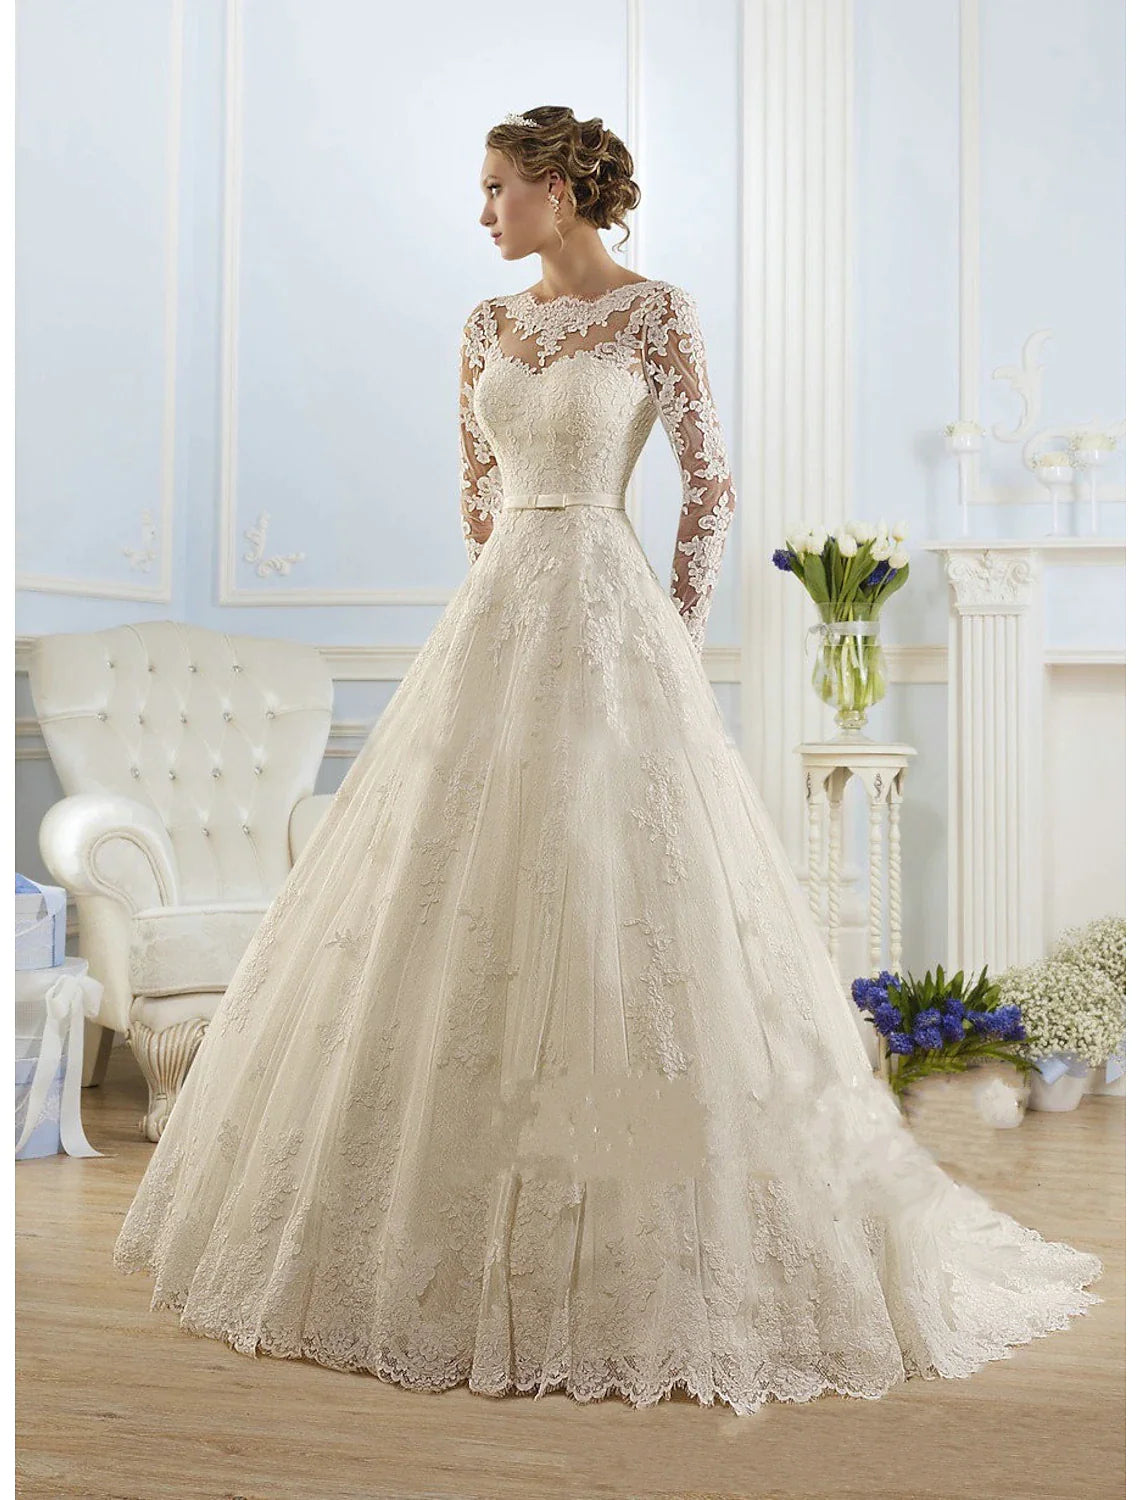 Engagement Formal Fall Wedding Dresses Ball Gown Illusion Neck Long Sleeve Court Train Lace Bridal Gowns With Appliques